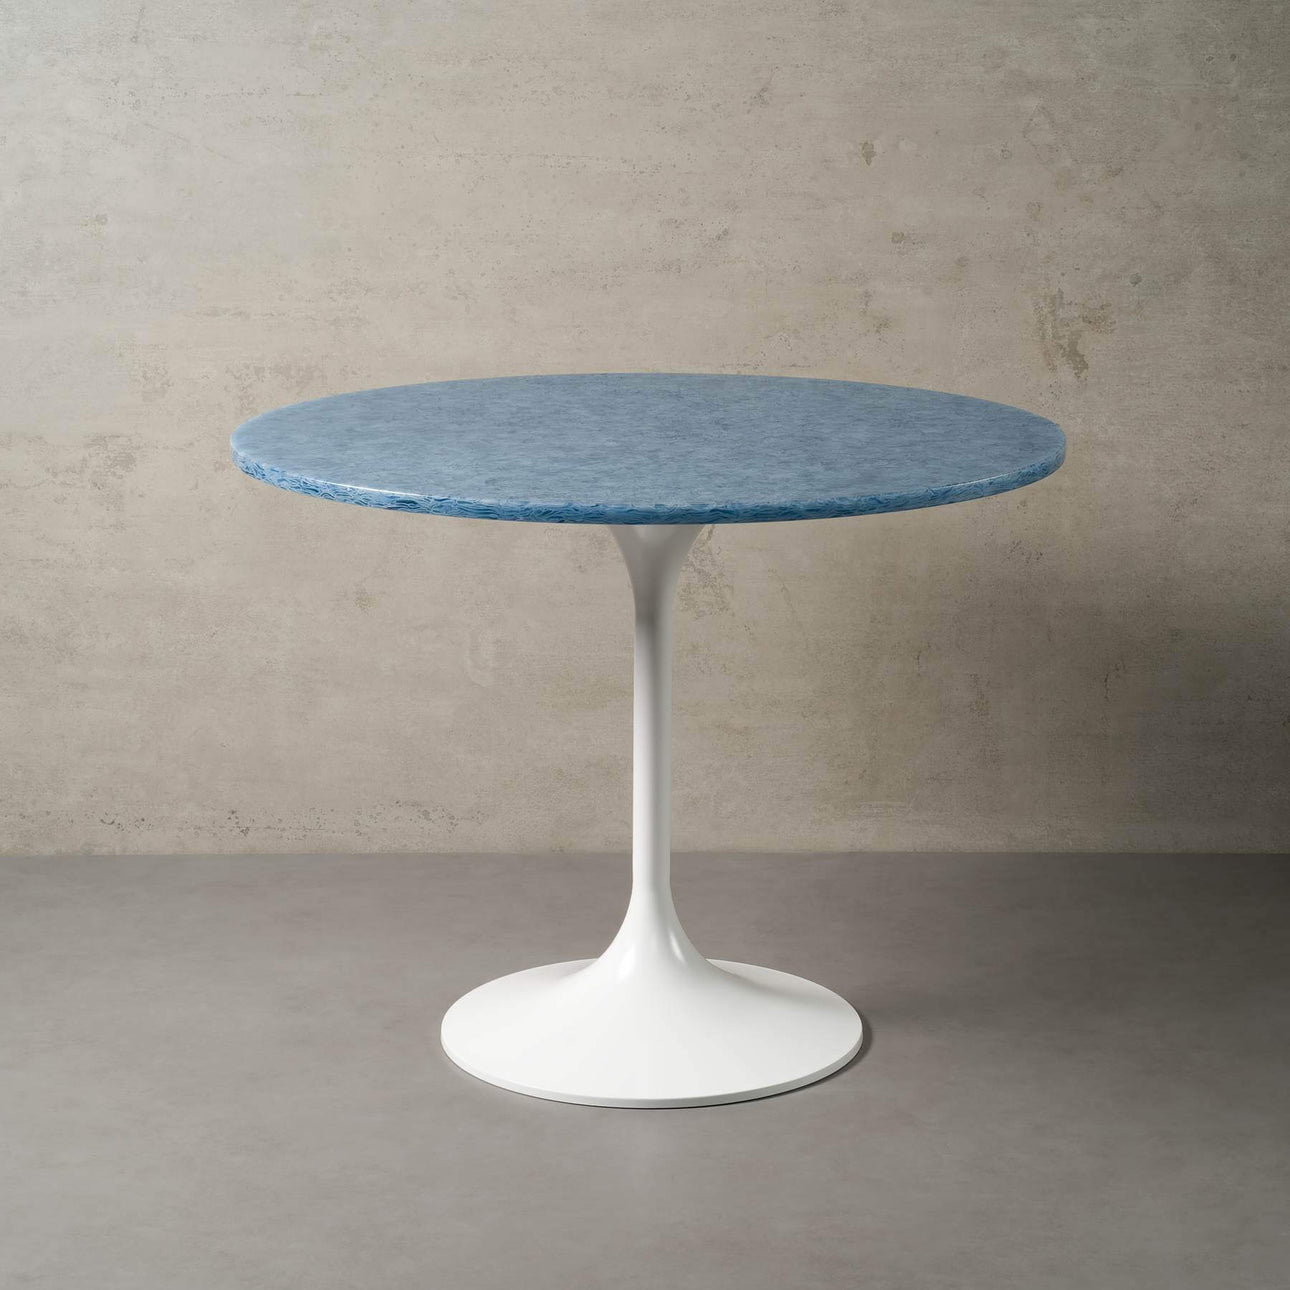 Tokyo glass ceramic dining table